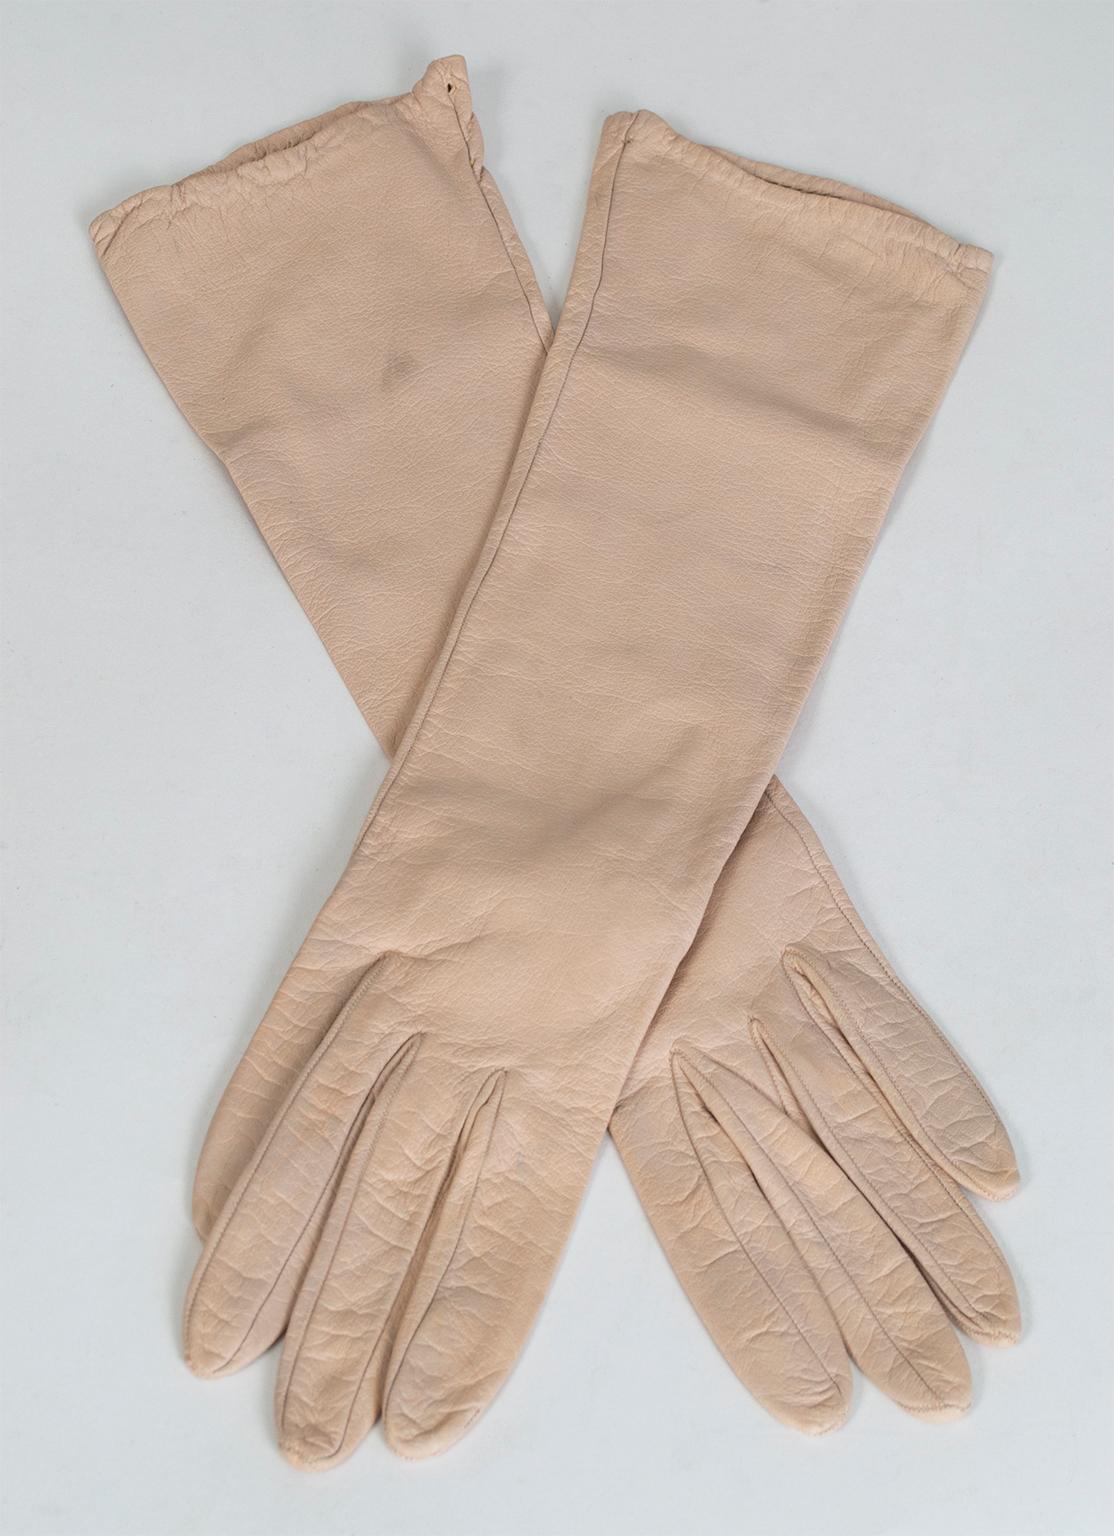 Nothing elevates evening wear like a second-skin leather glove, especially one in an unusual color. This mid-forearm length pair offers both an elegant, atypical shade and a silk lining for warmth during the chilly winter arts season and winter